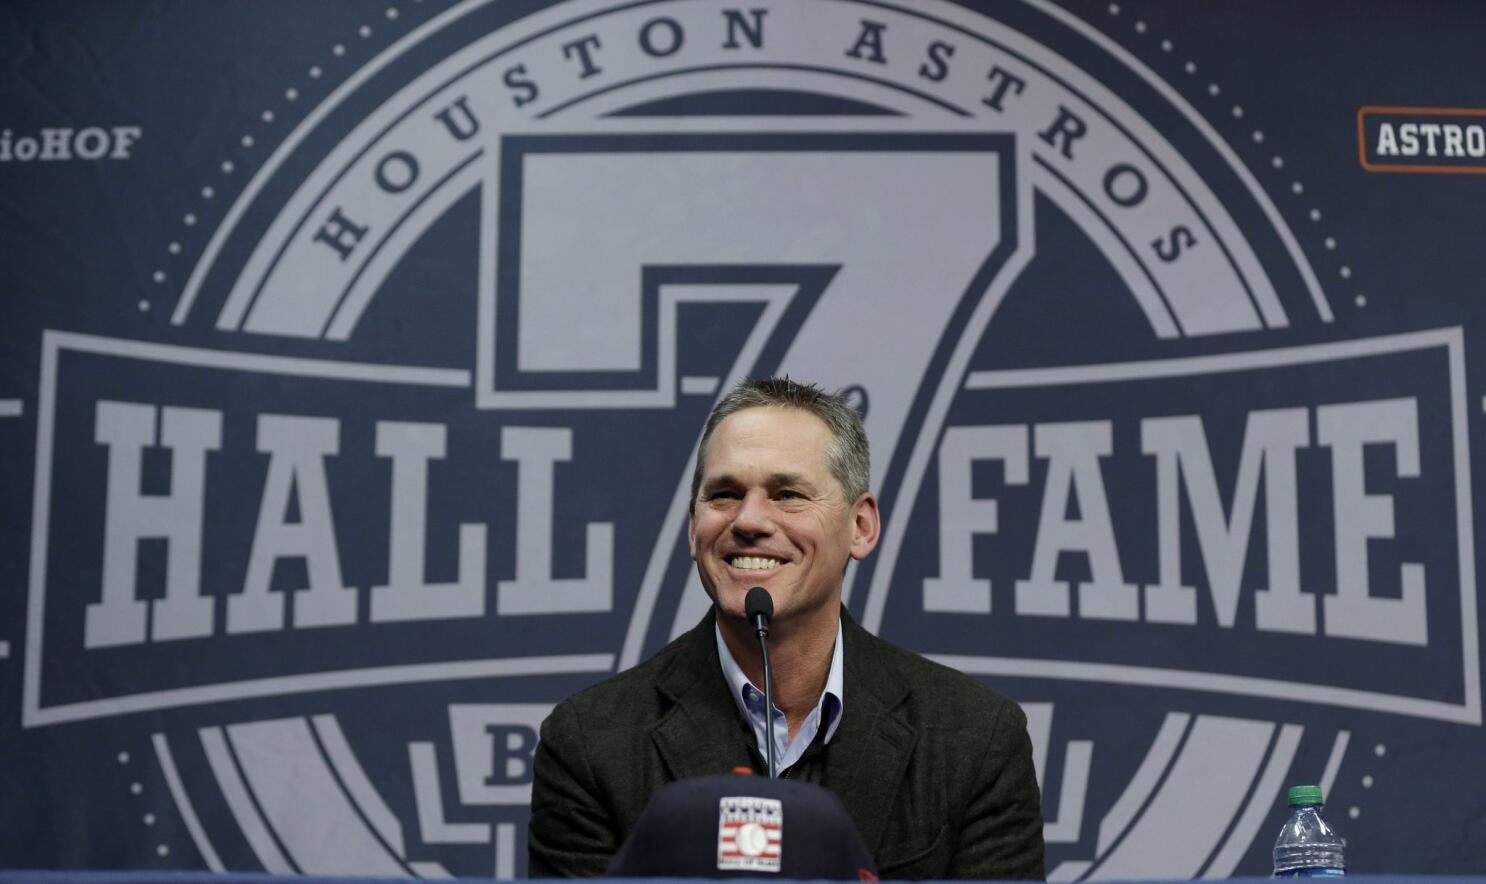 No one elected to baseball's Hall of Fame; Biggio closest